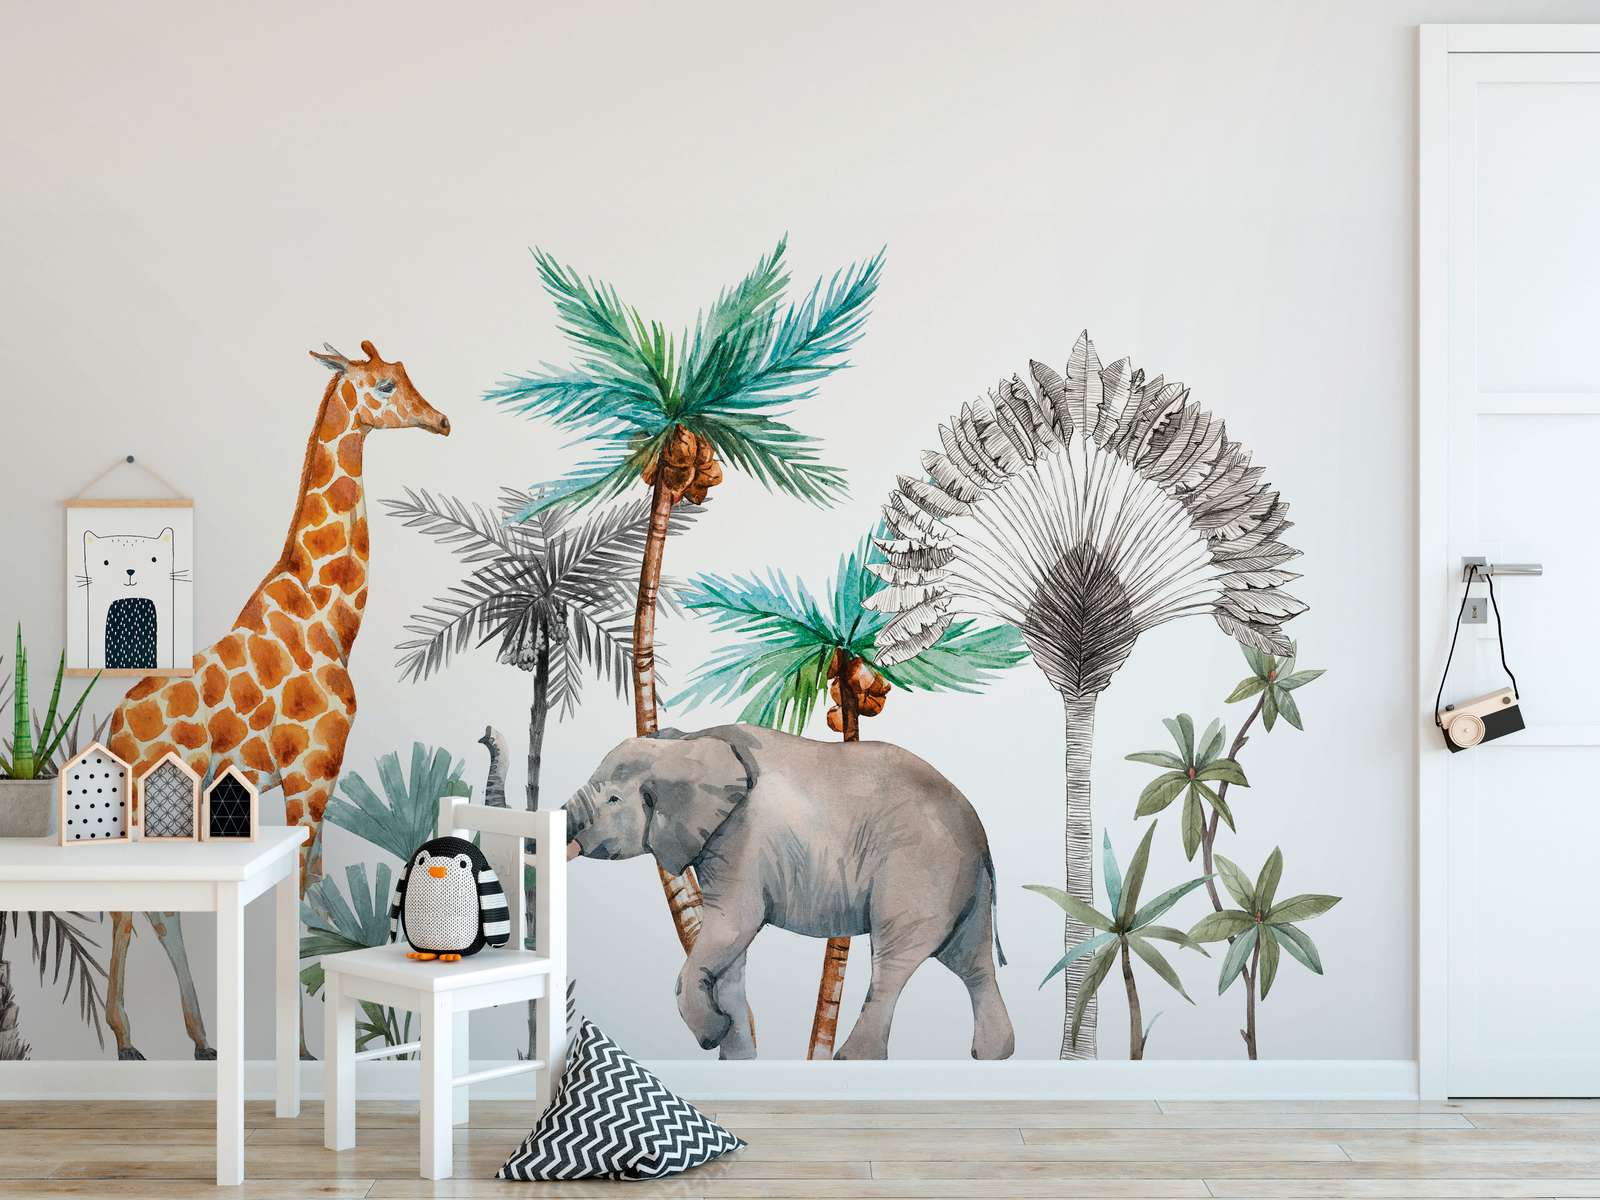             Nursery Wallpaper with Animals and Trees - White, Green, Grey
        